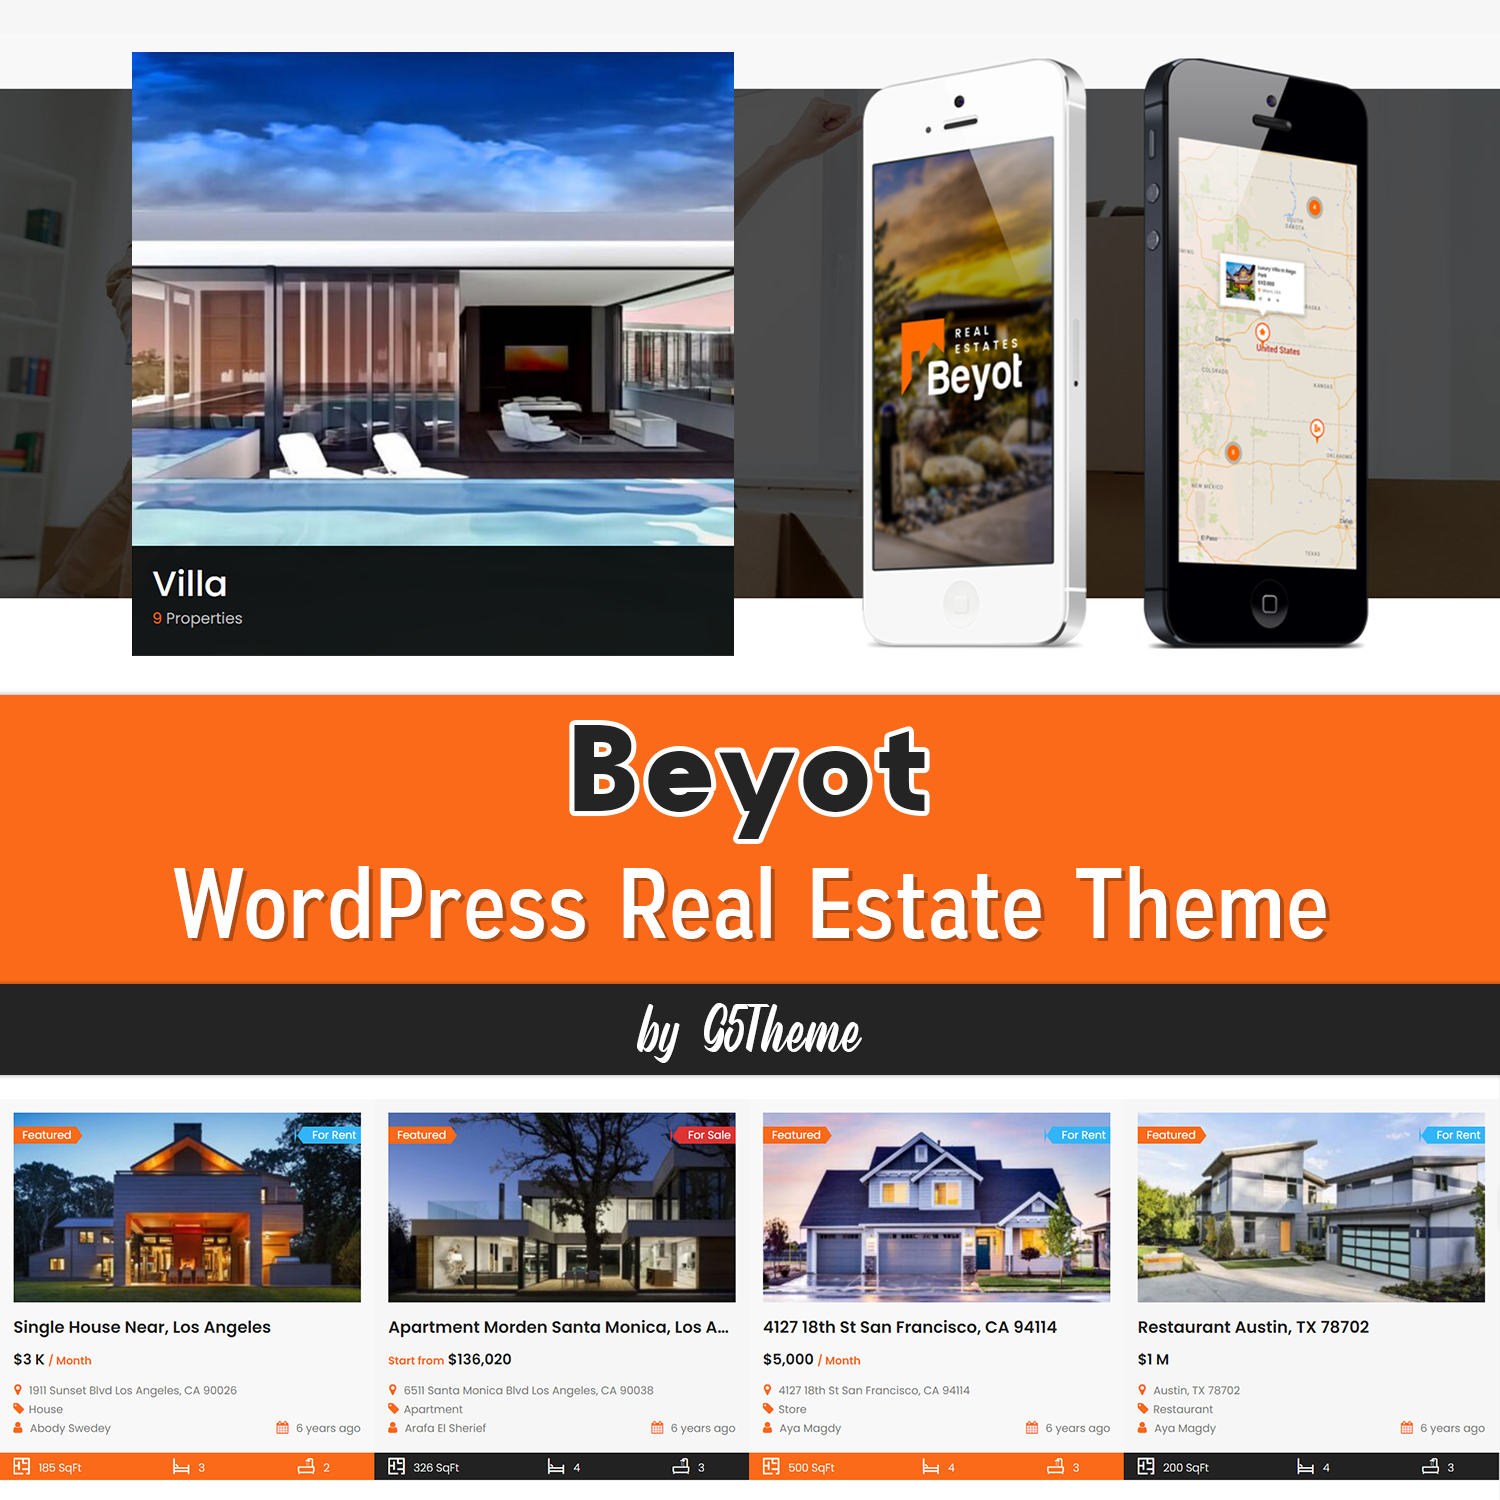 Images with beyot wordpress real estate theme.